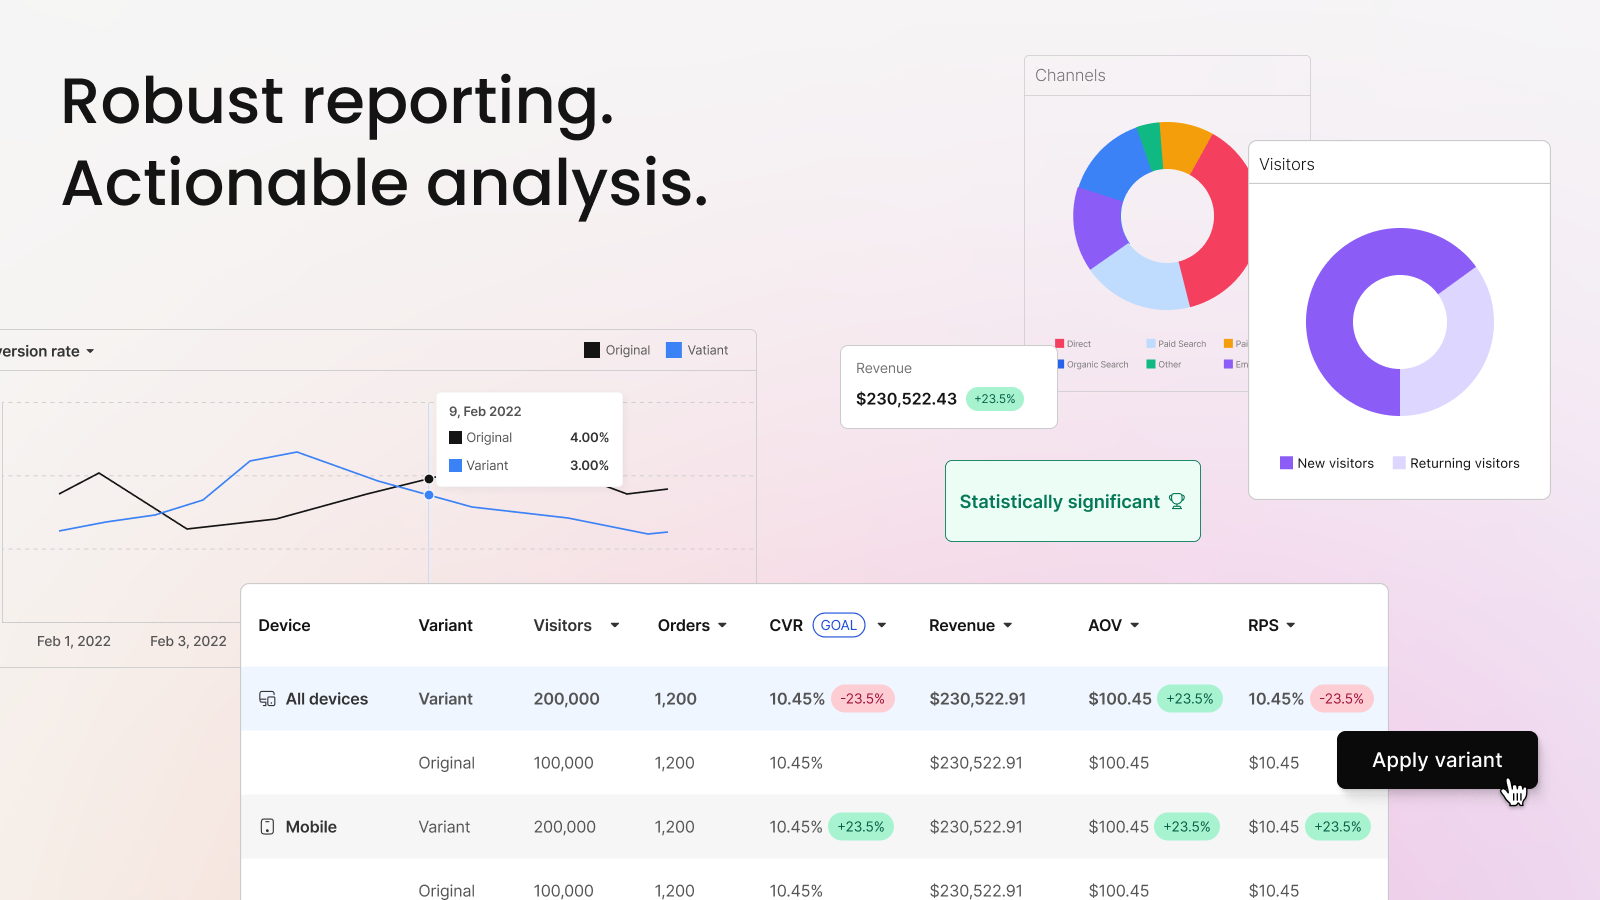 Robust reporting. Actionable analysis.